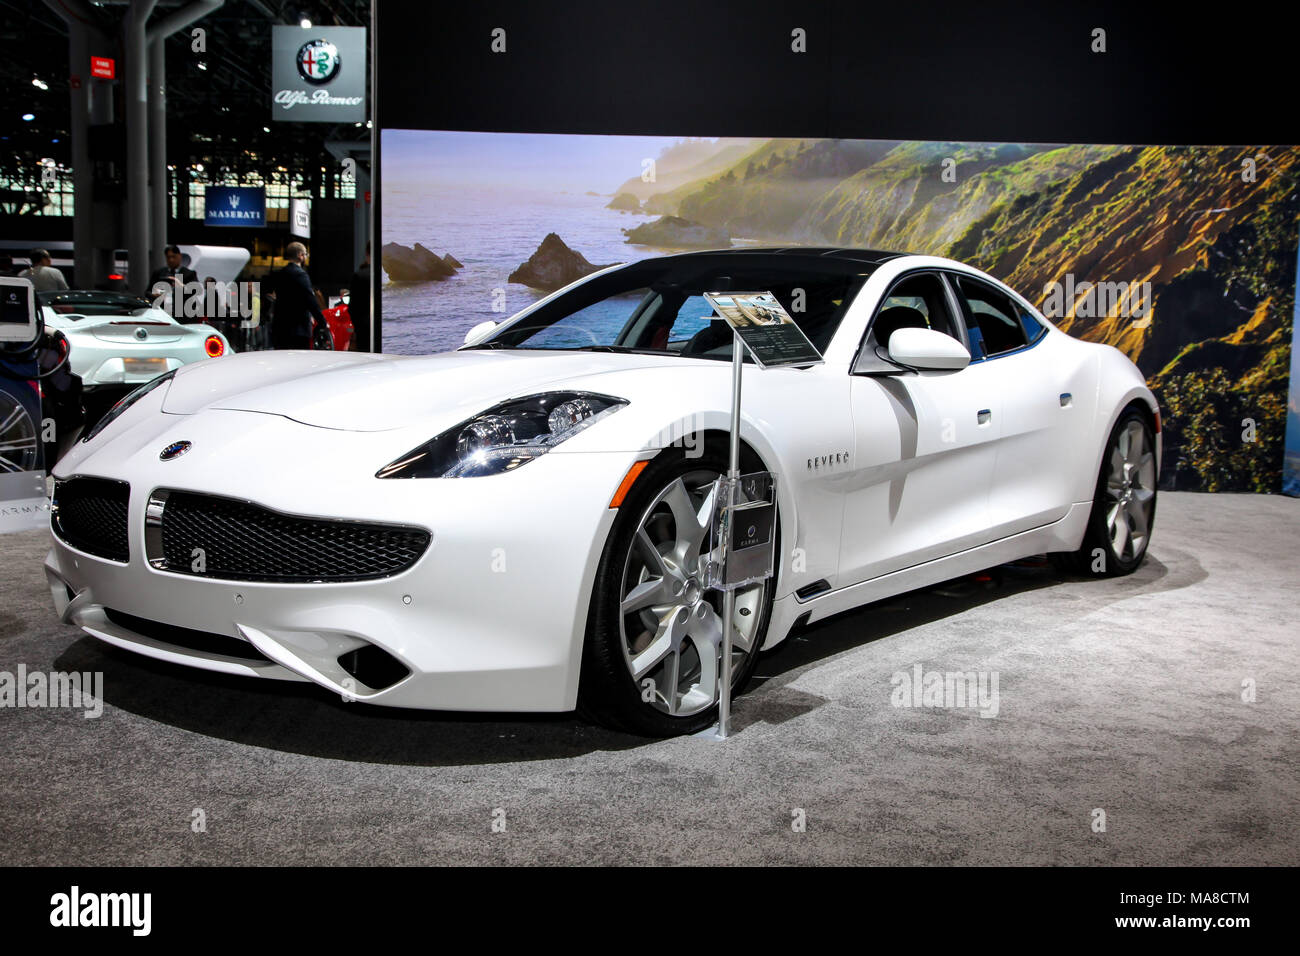 NEW YORK CITY-MARCH 28: 2018 Karma Revero hybrid electric luxury super cars shown at the New York International Auto Show 2018, at the Jacob Javits Ce Stock Photo